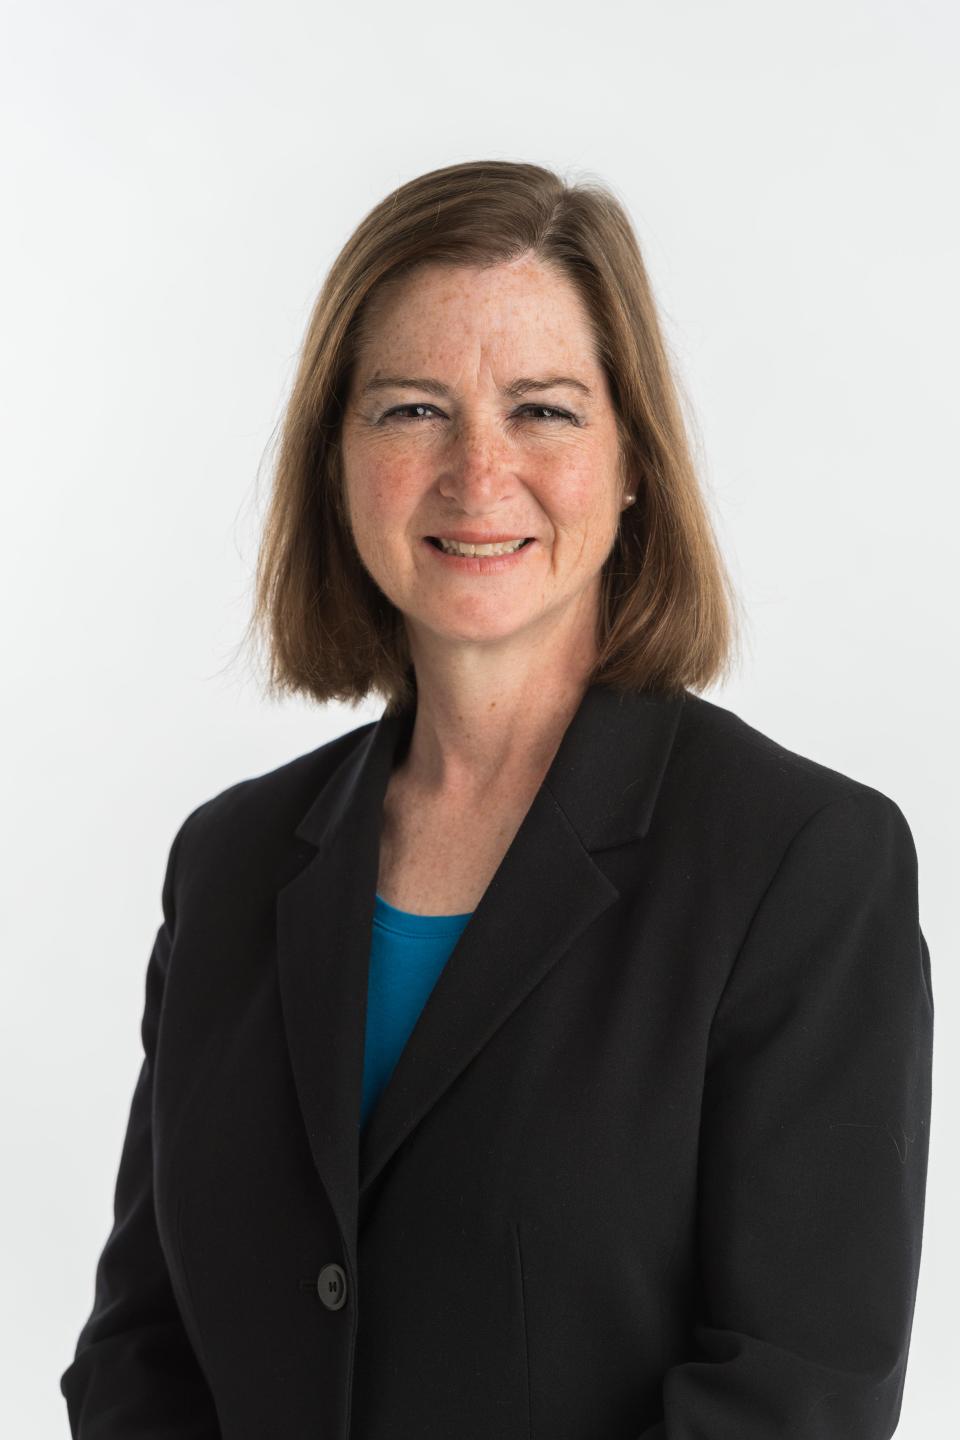 Barbara McQuade is a professor from practice at the University of Michigan Law School and a former U.S. Attorney for the Eastern District of Michigan.